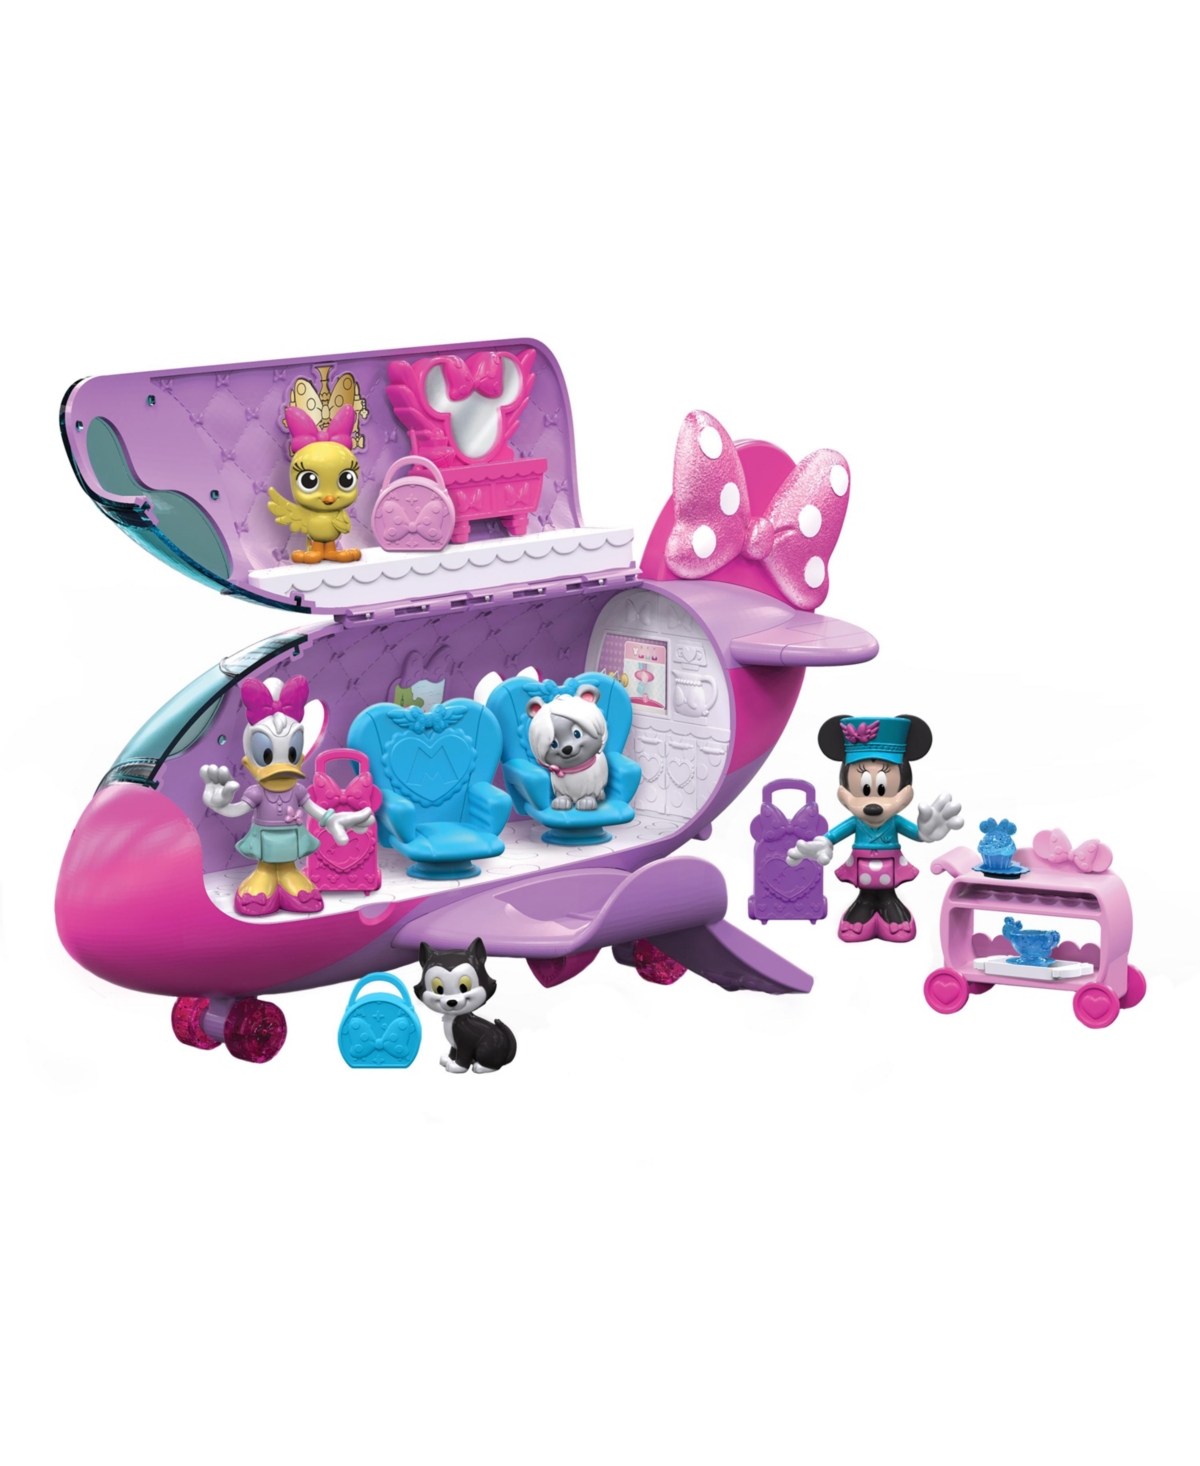 Shop Sesame Street Macy's Disney Junior Minnie Mouse Bow Liner Jet Toy Figures And Playset